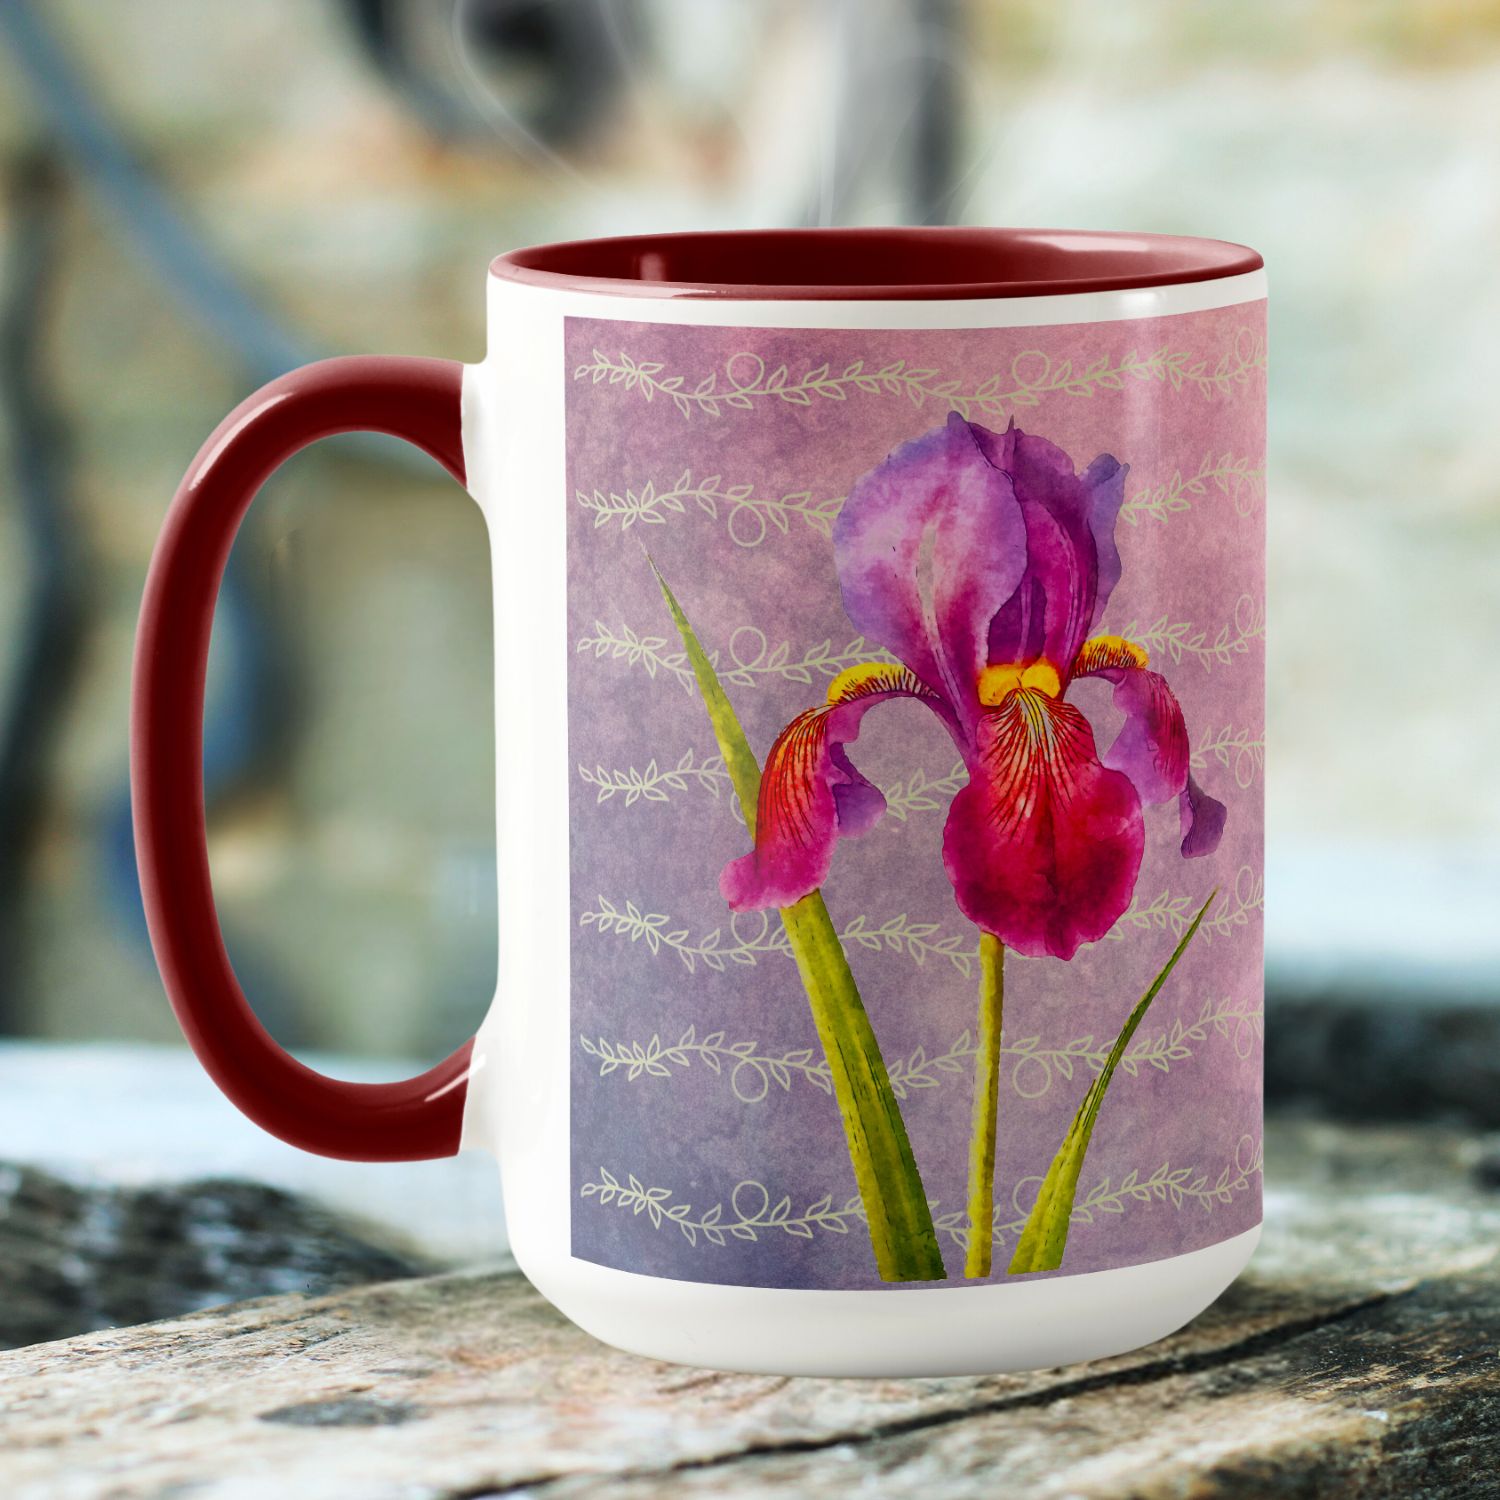 A mug featuring a detailed illustration of iris flowers in various shades of violet. The delicate petals of the irises are depicted with intricate lines and gradients, creating a realistic and vibrant design. The background of the mug complements the floral artwork with a subtle, matching violet hue, enhancing the overall aesthetic.